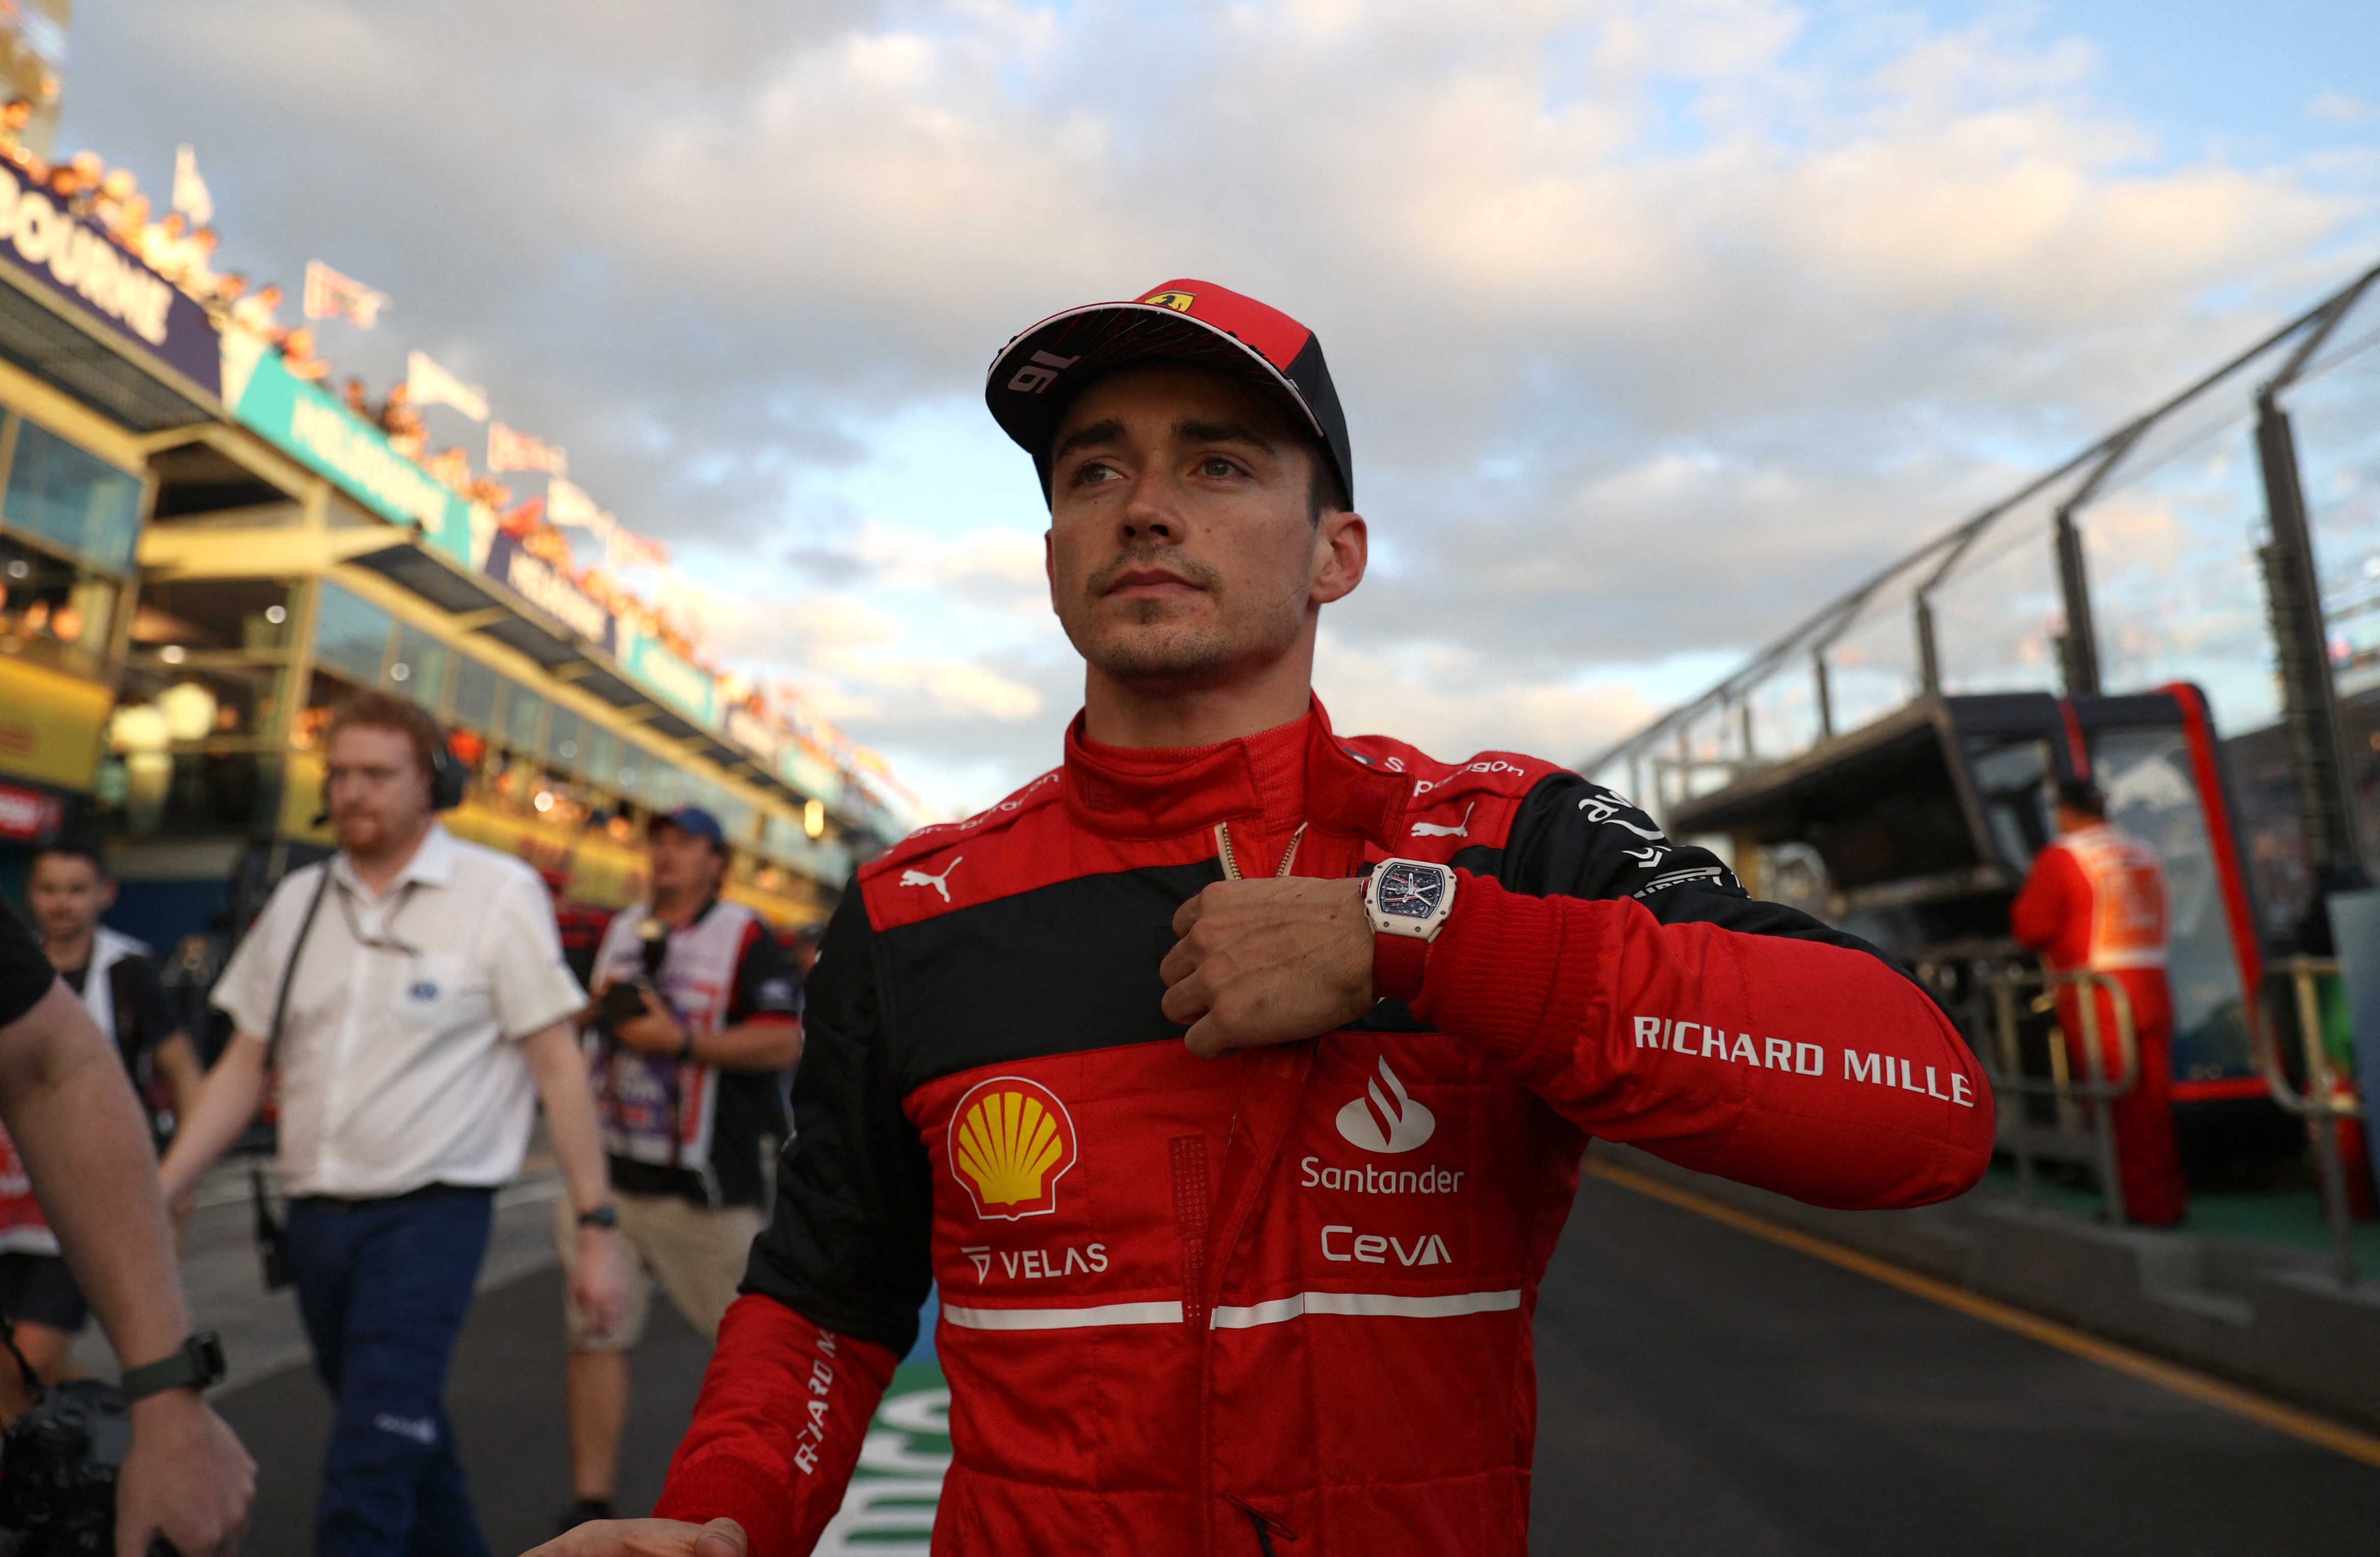 Ferrari's Charles Leclerc makes his musical debut. And it's rather